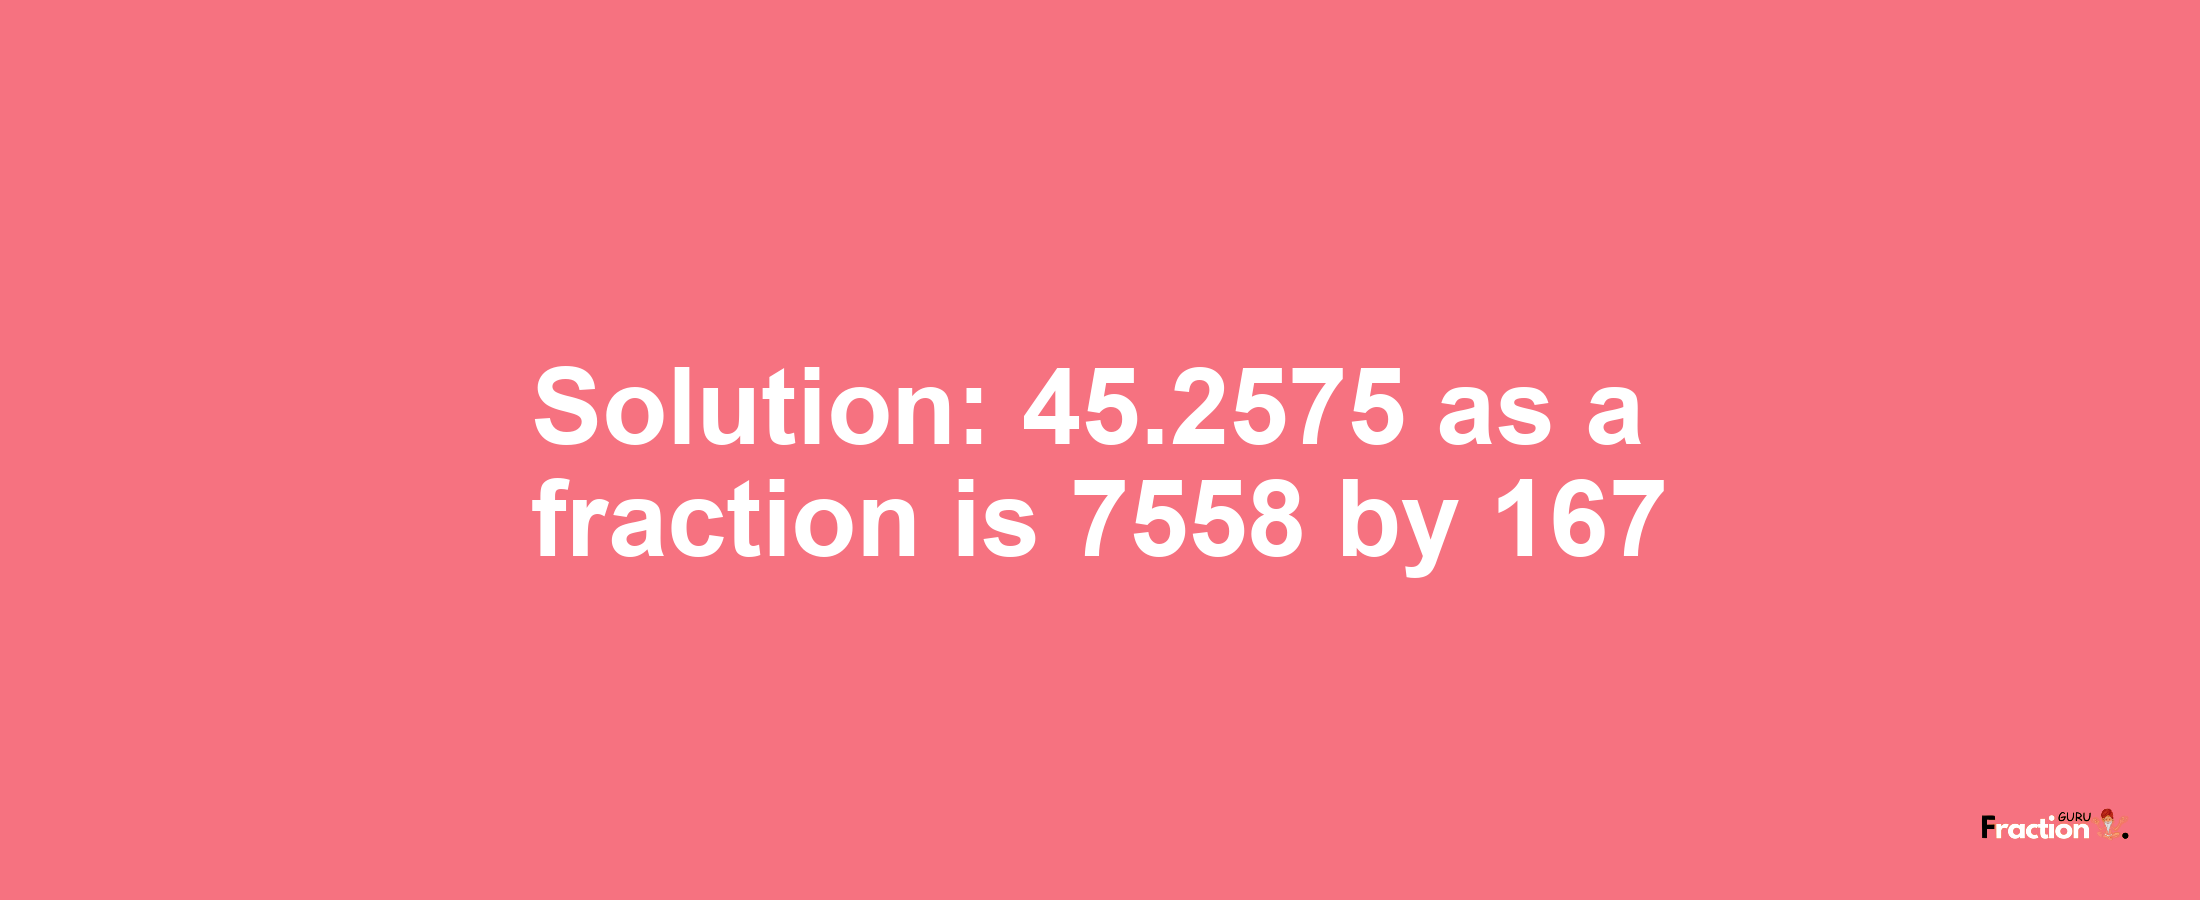 Solution:45.2575 as a fraction is 7558/167